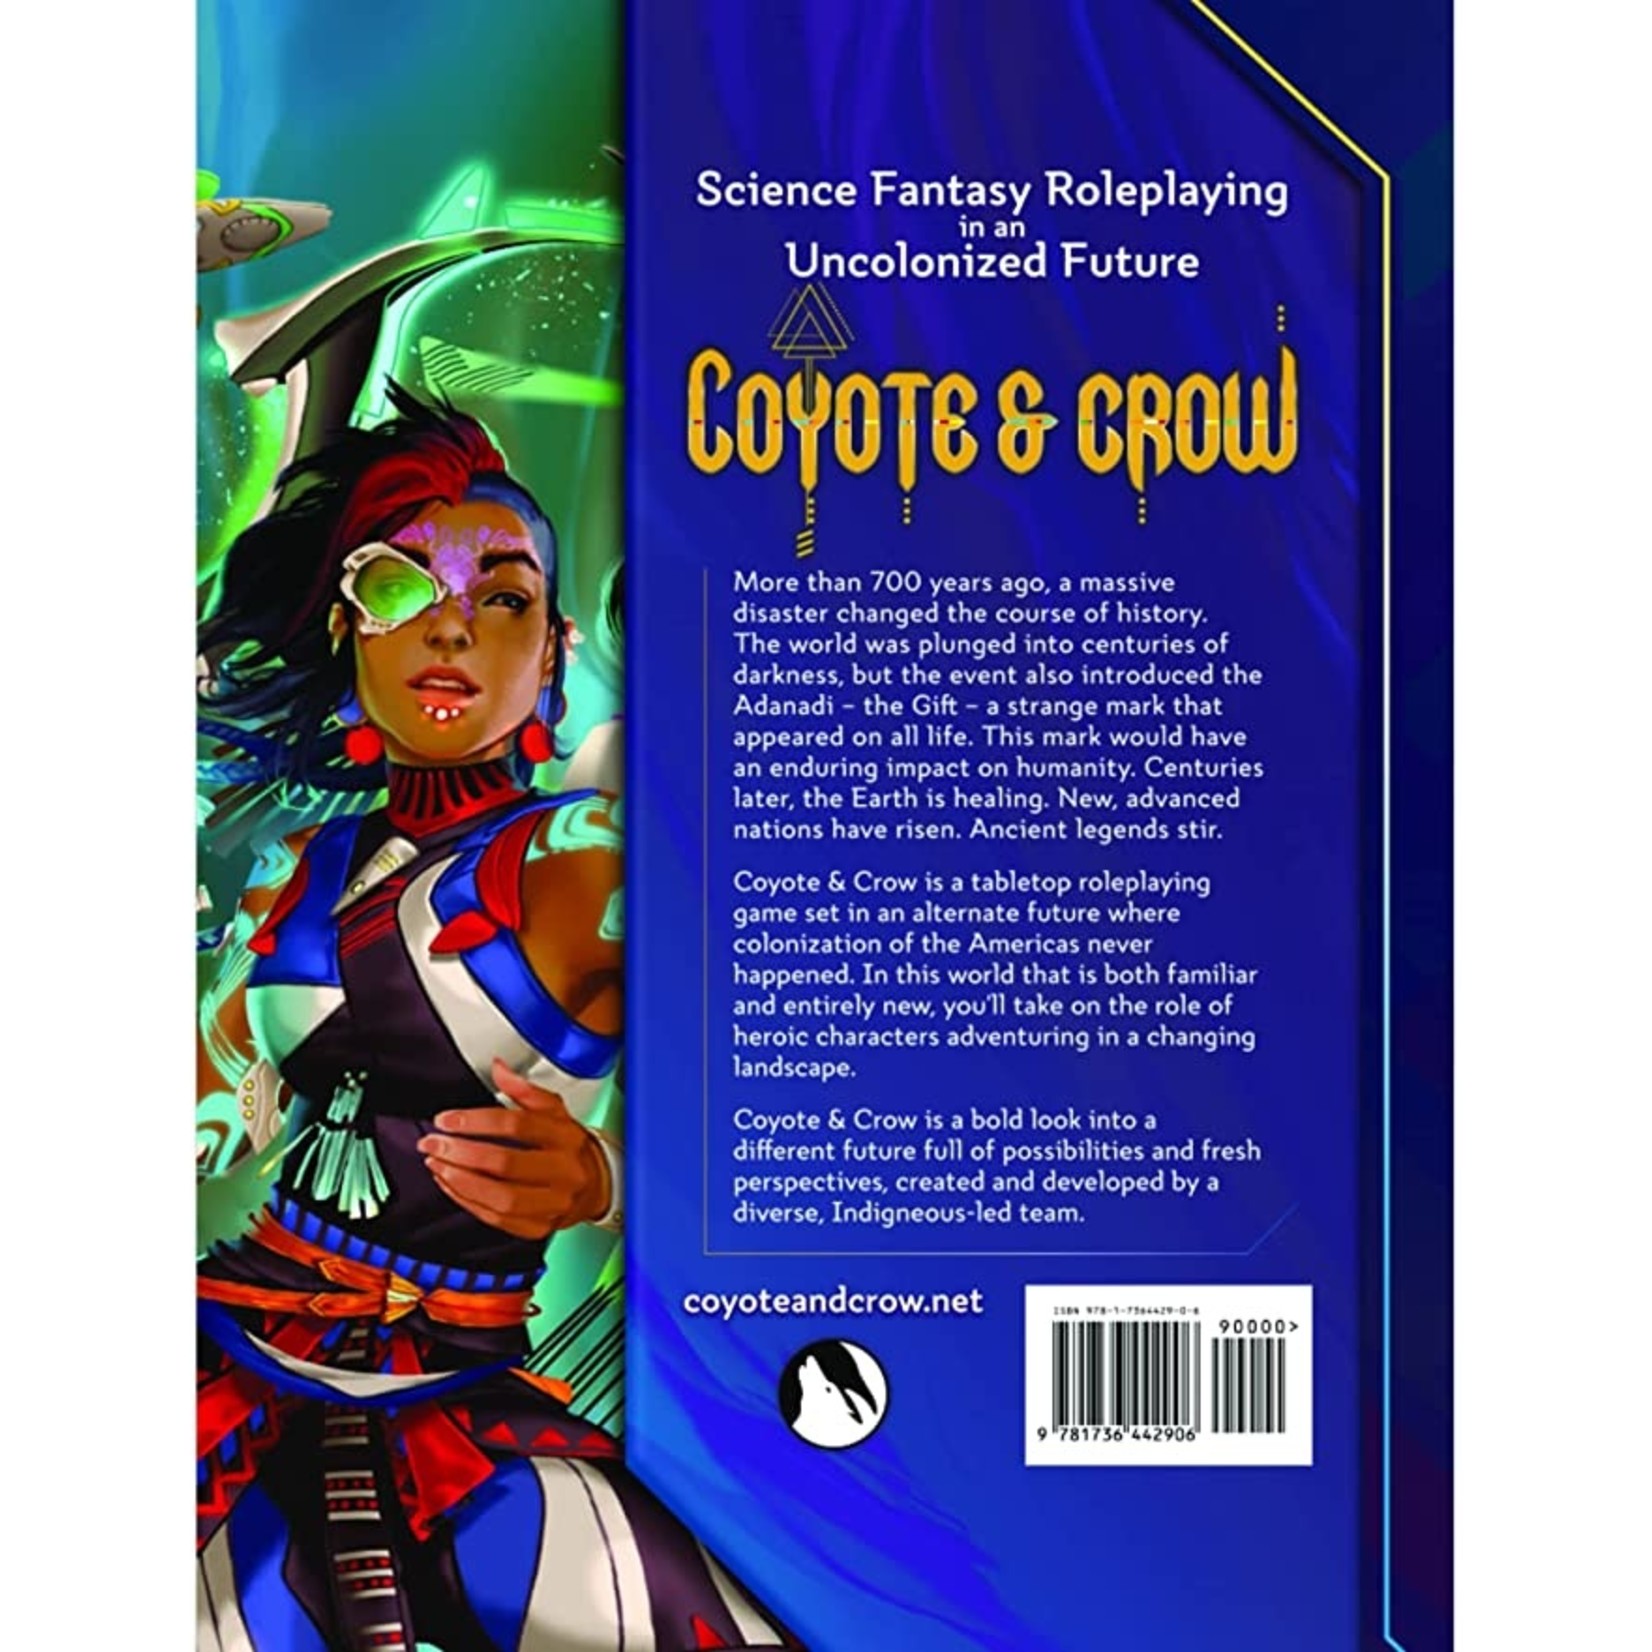 Coyote & Crow Coyote & Crow, Role-Playing Game